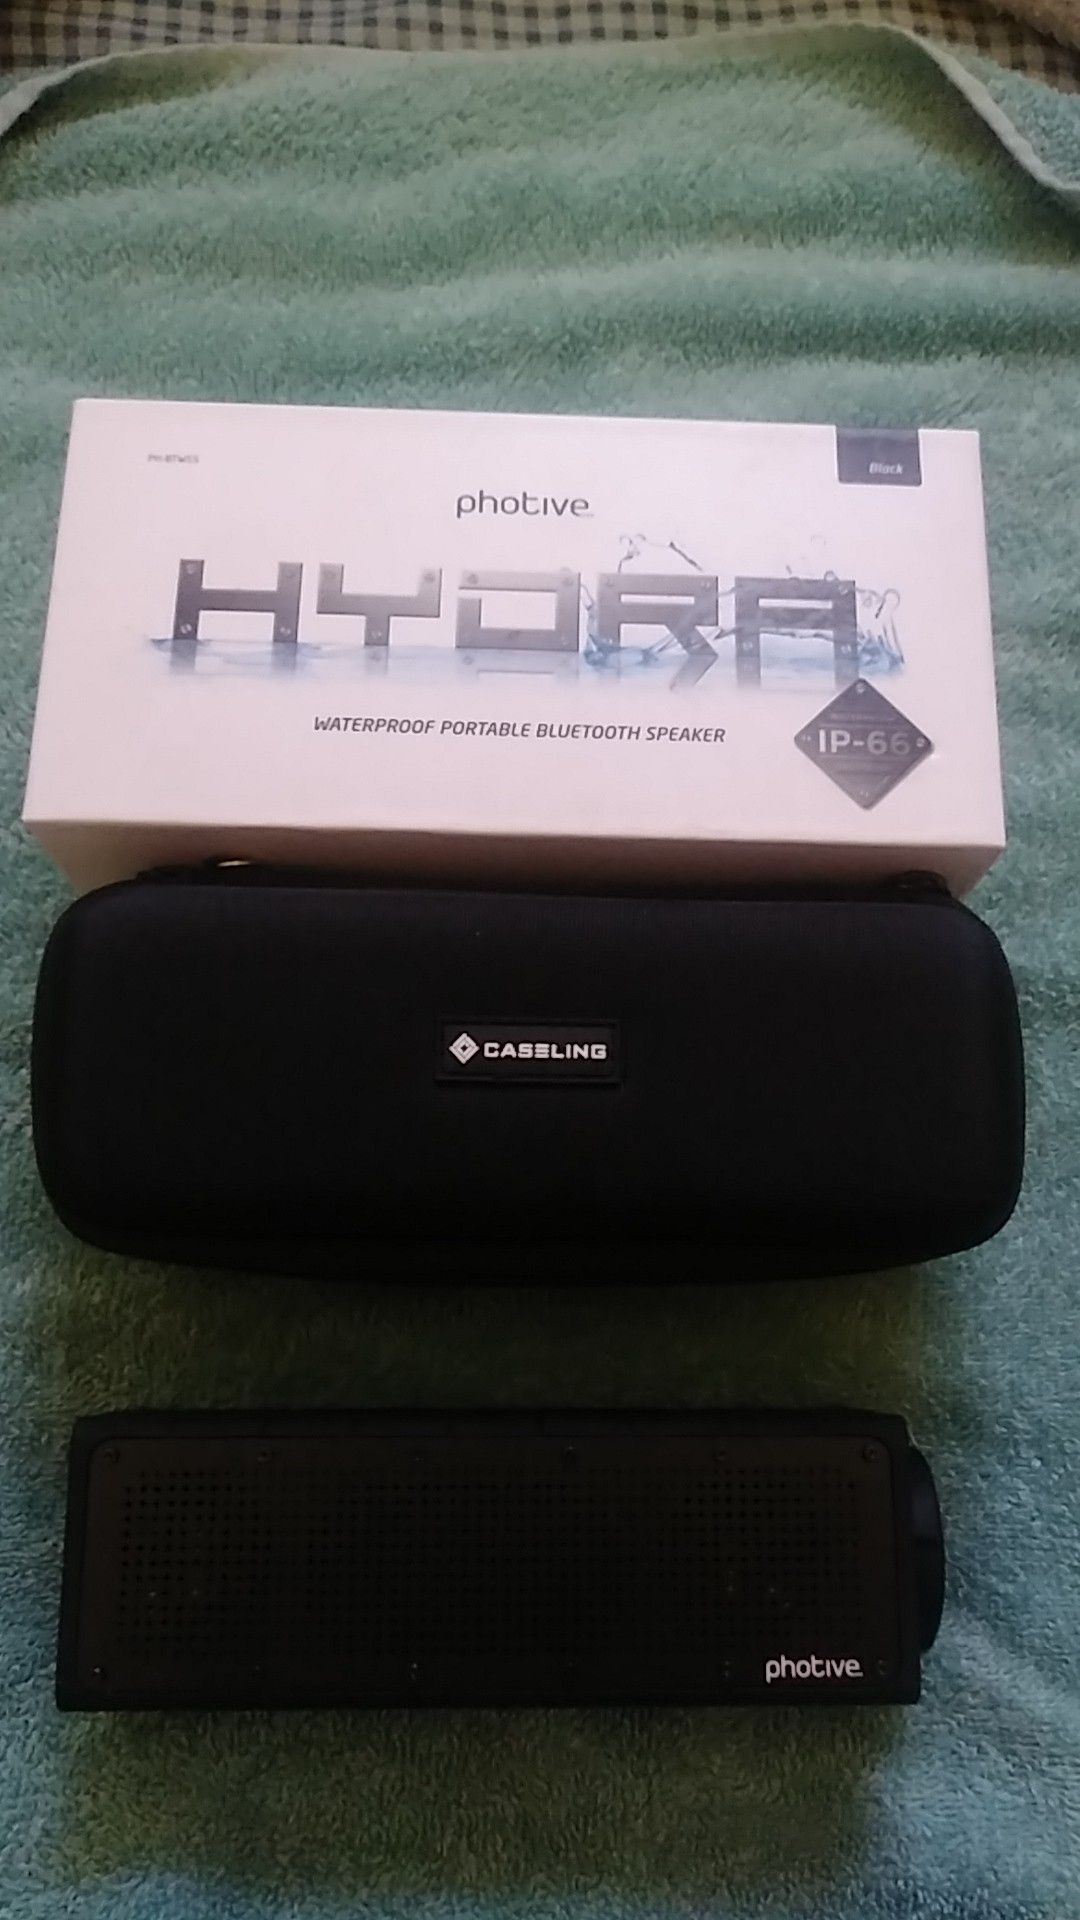 Brand new photive Bluetooth speaker with carrying case